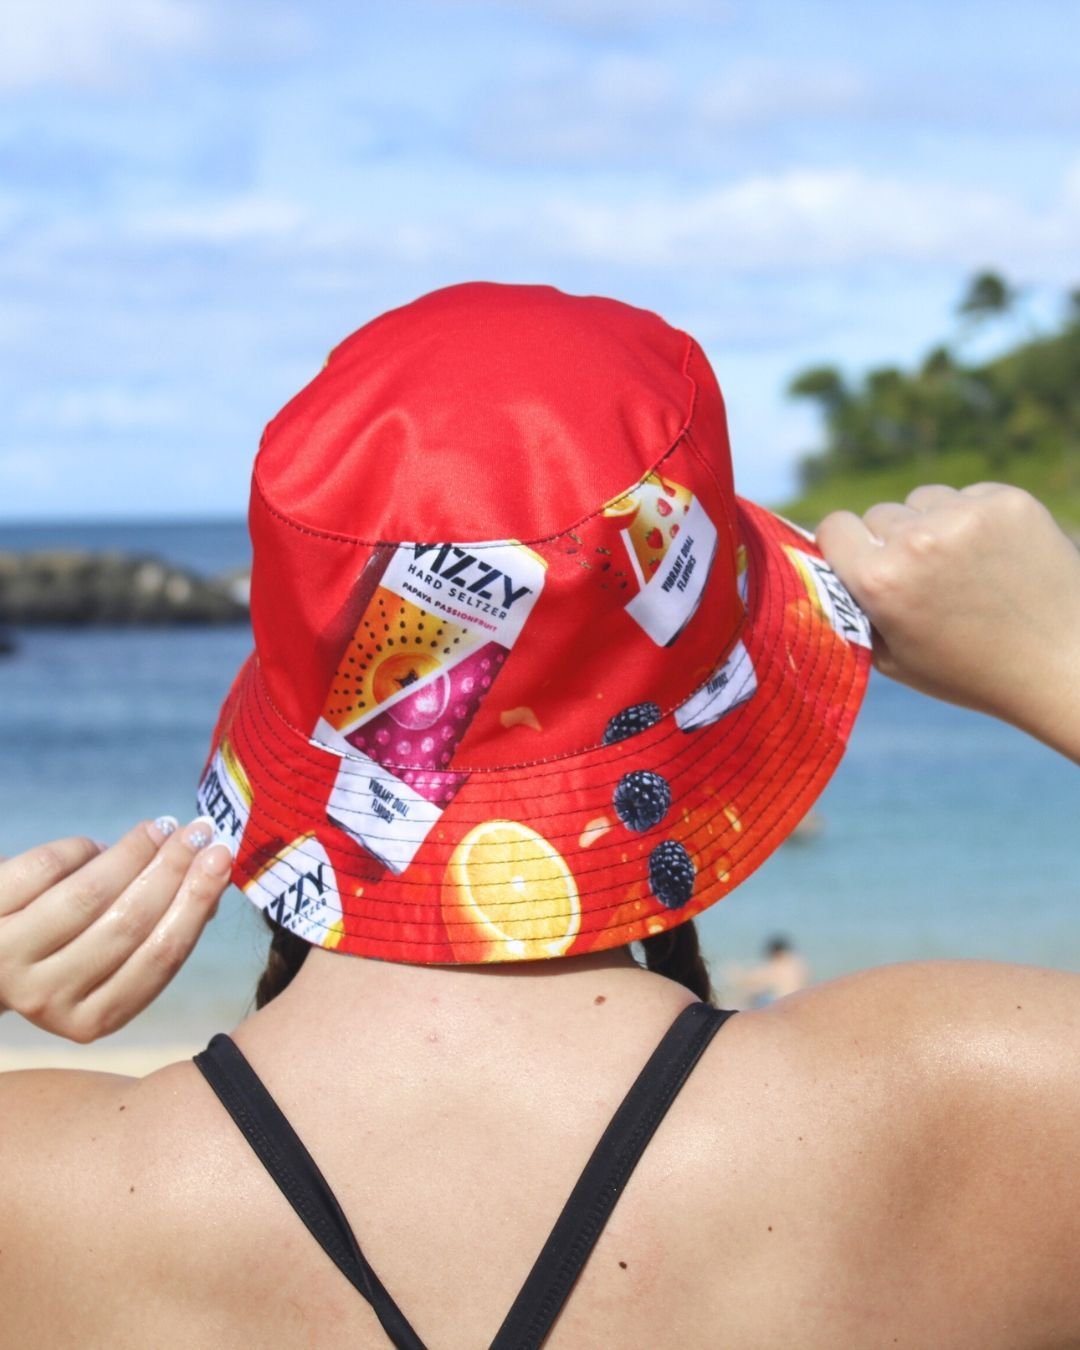 Meet your new favorite accessory! Our fully customizable Bucket Hat is versatile and offers great sun protection. It's reversible, so you can print on both sides for double the style. Made from 100% recycled polyester, this lightweight and unstructur